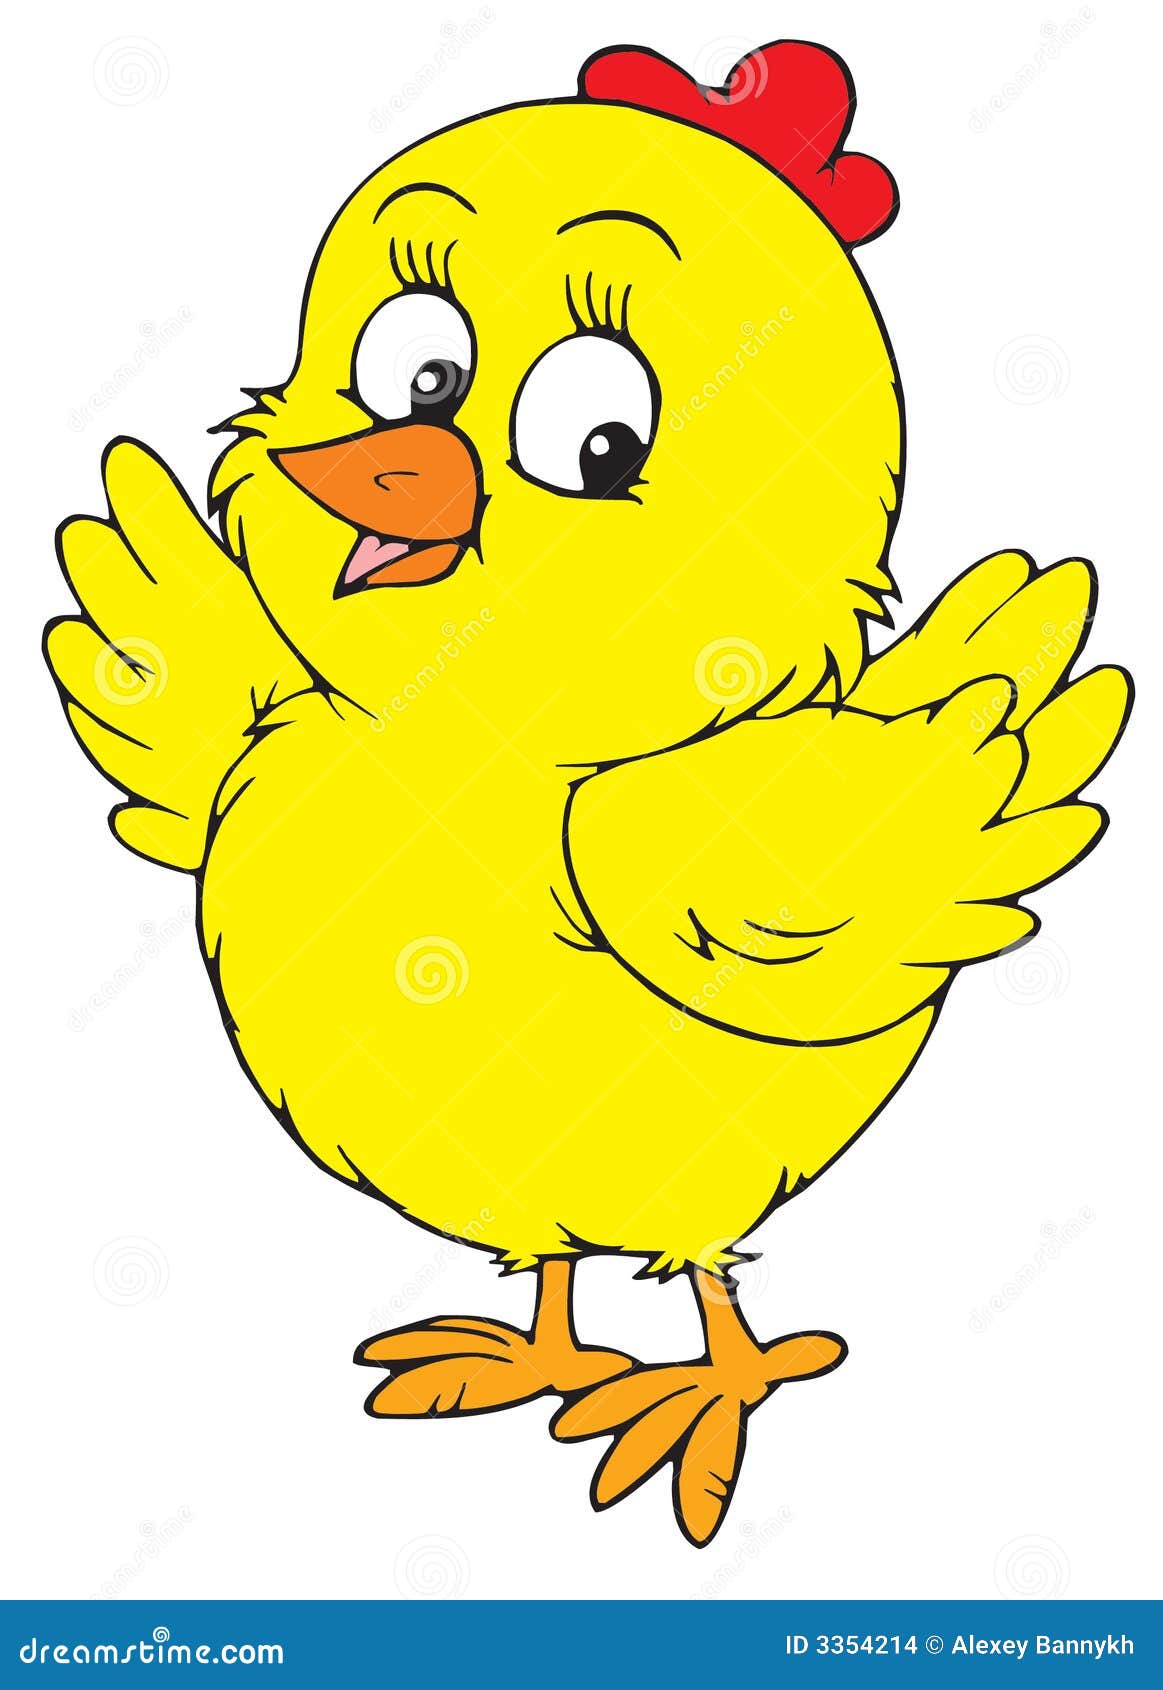 clipart yellow chick - photo #5